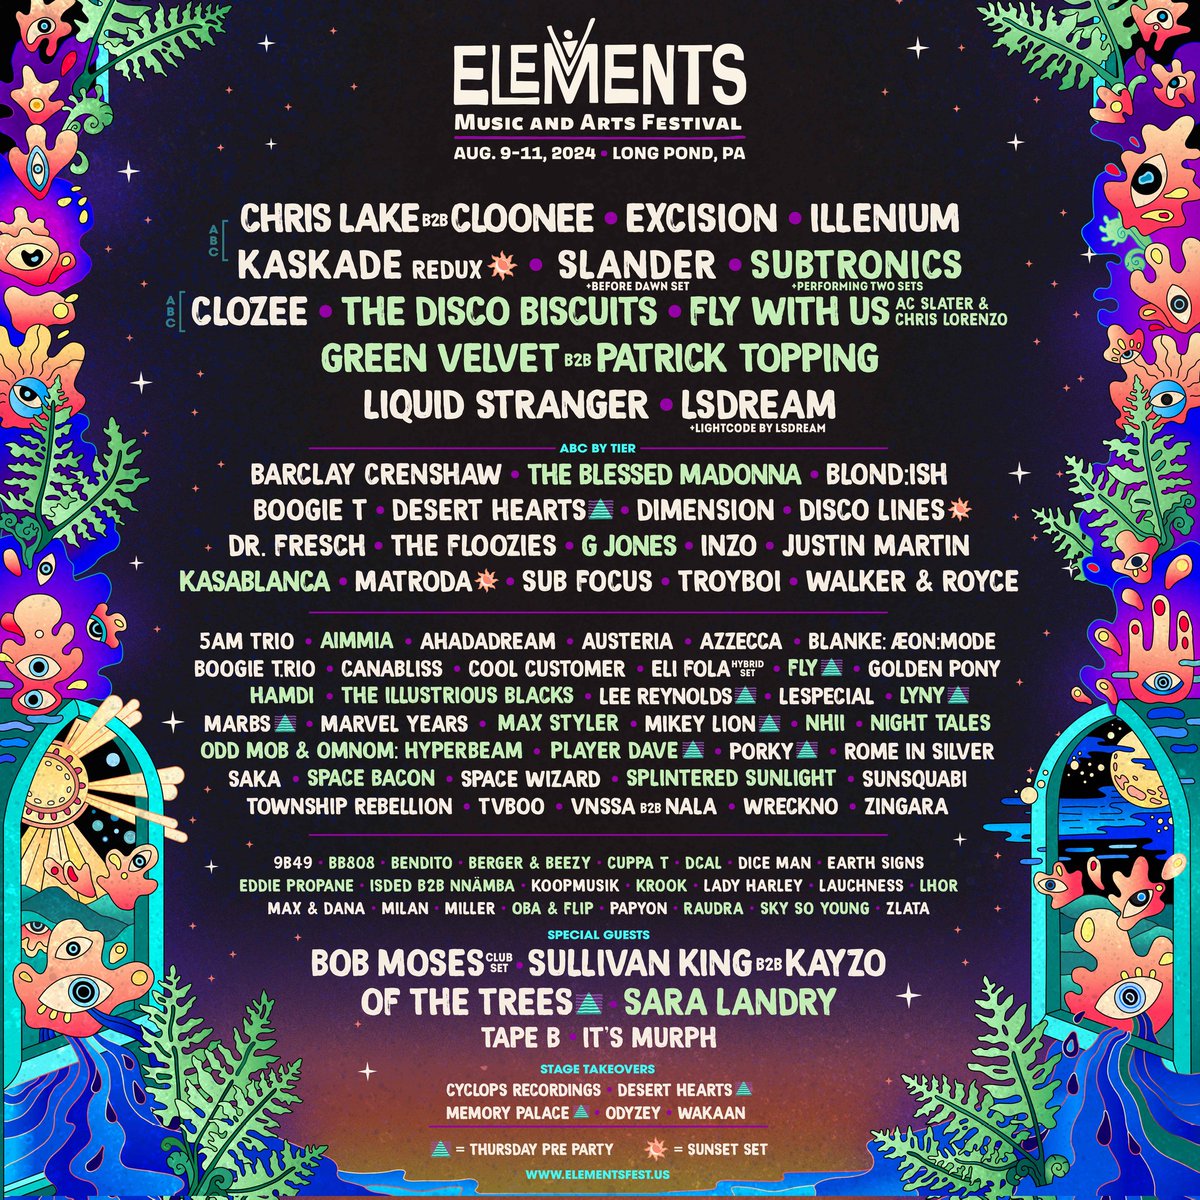 This is going to be class! B2B with my bro @GreenVelvet_ at @elementsfest_